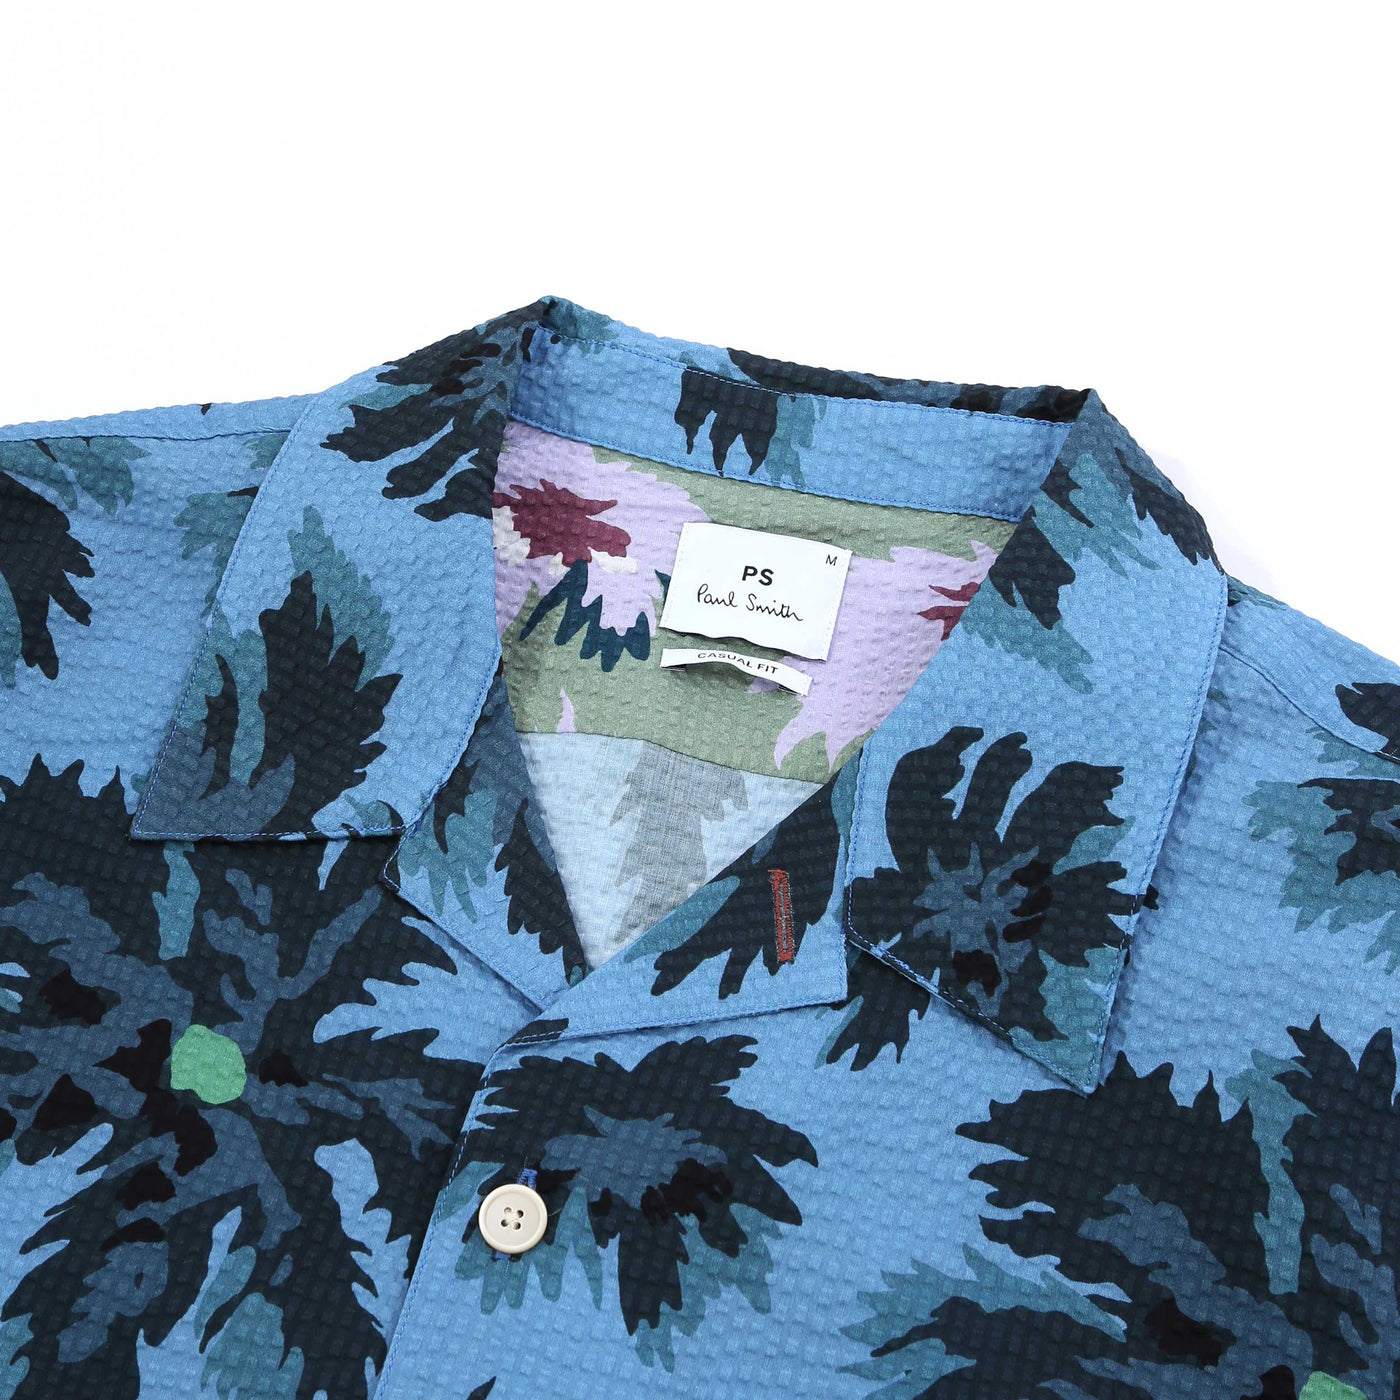 Paul Smith Casual Fit SS Shirt in Blue Collar